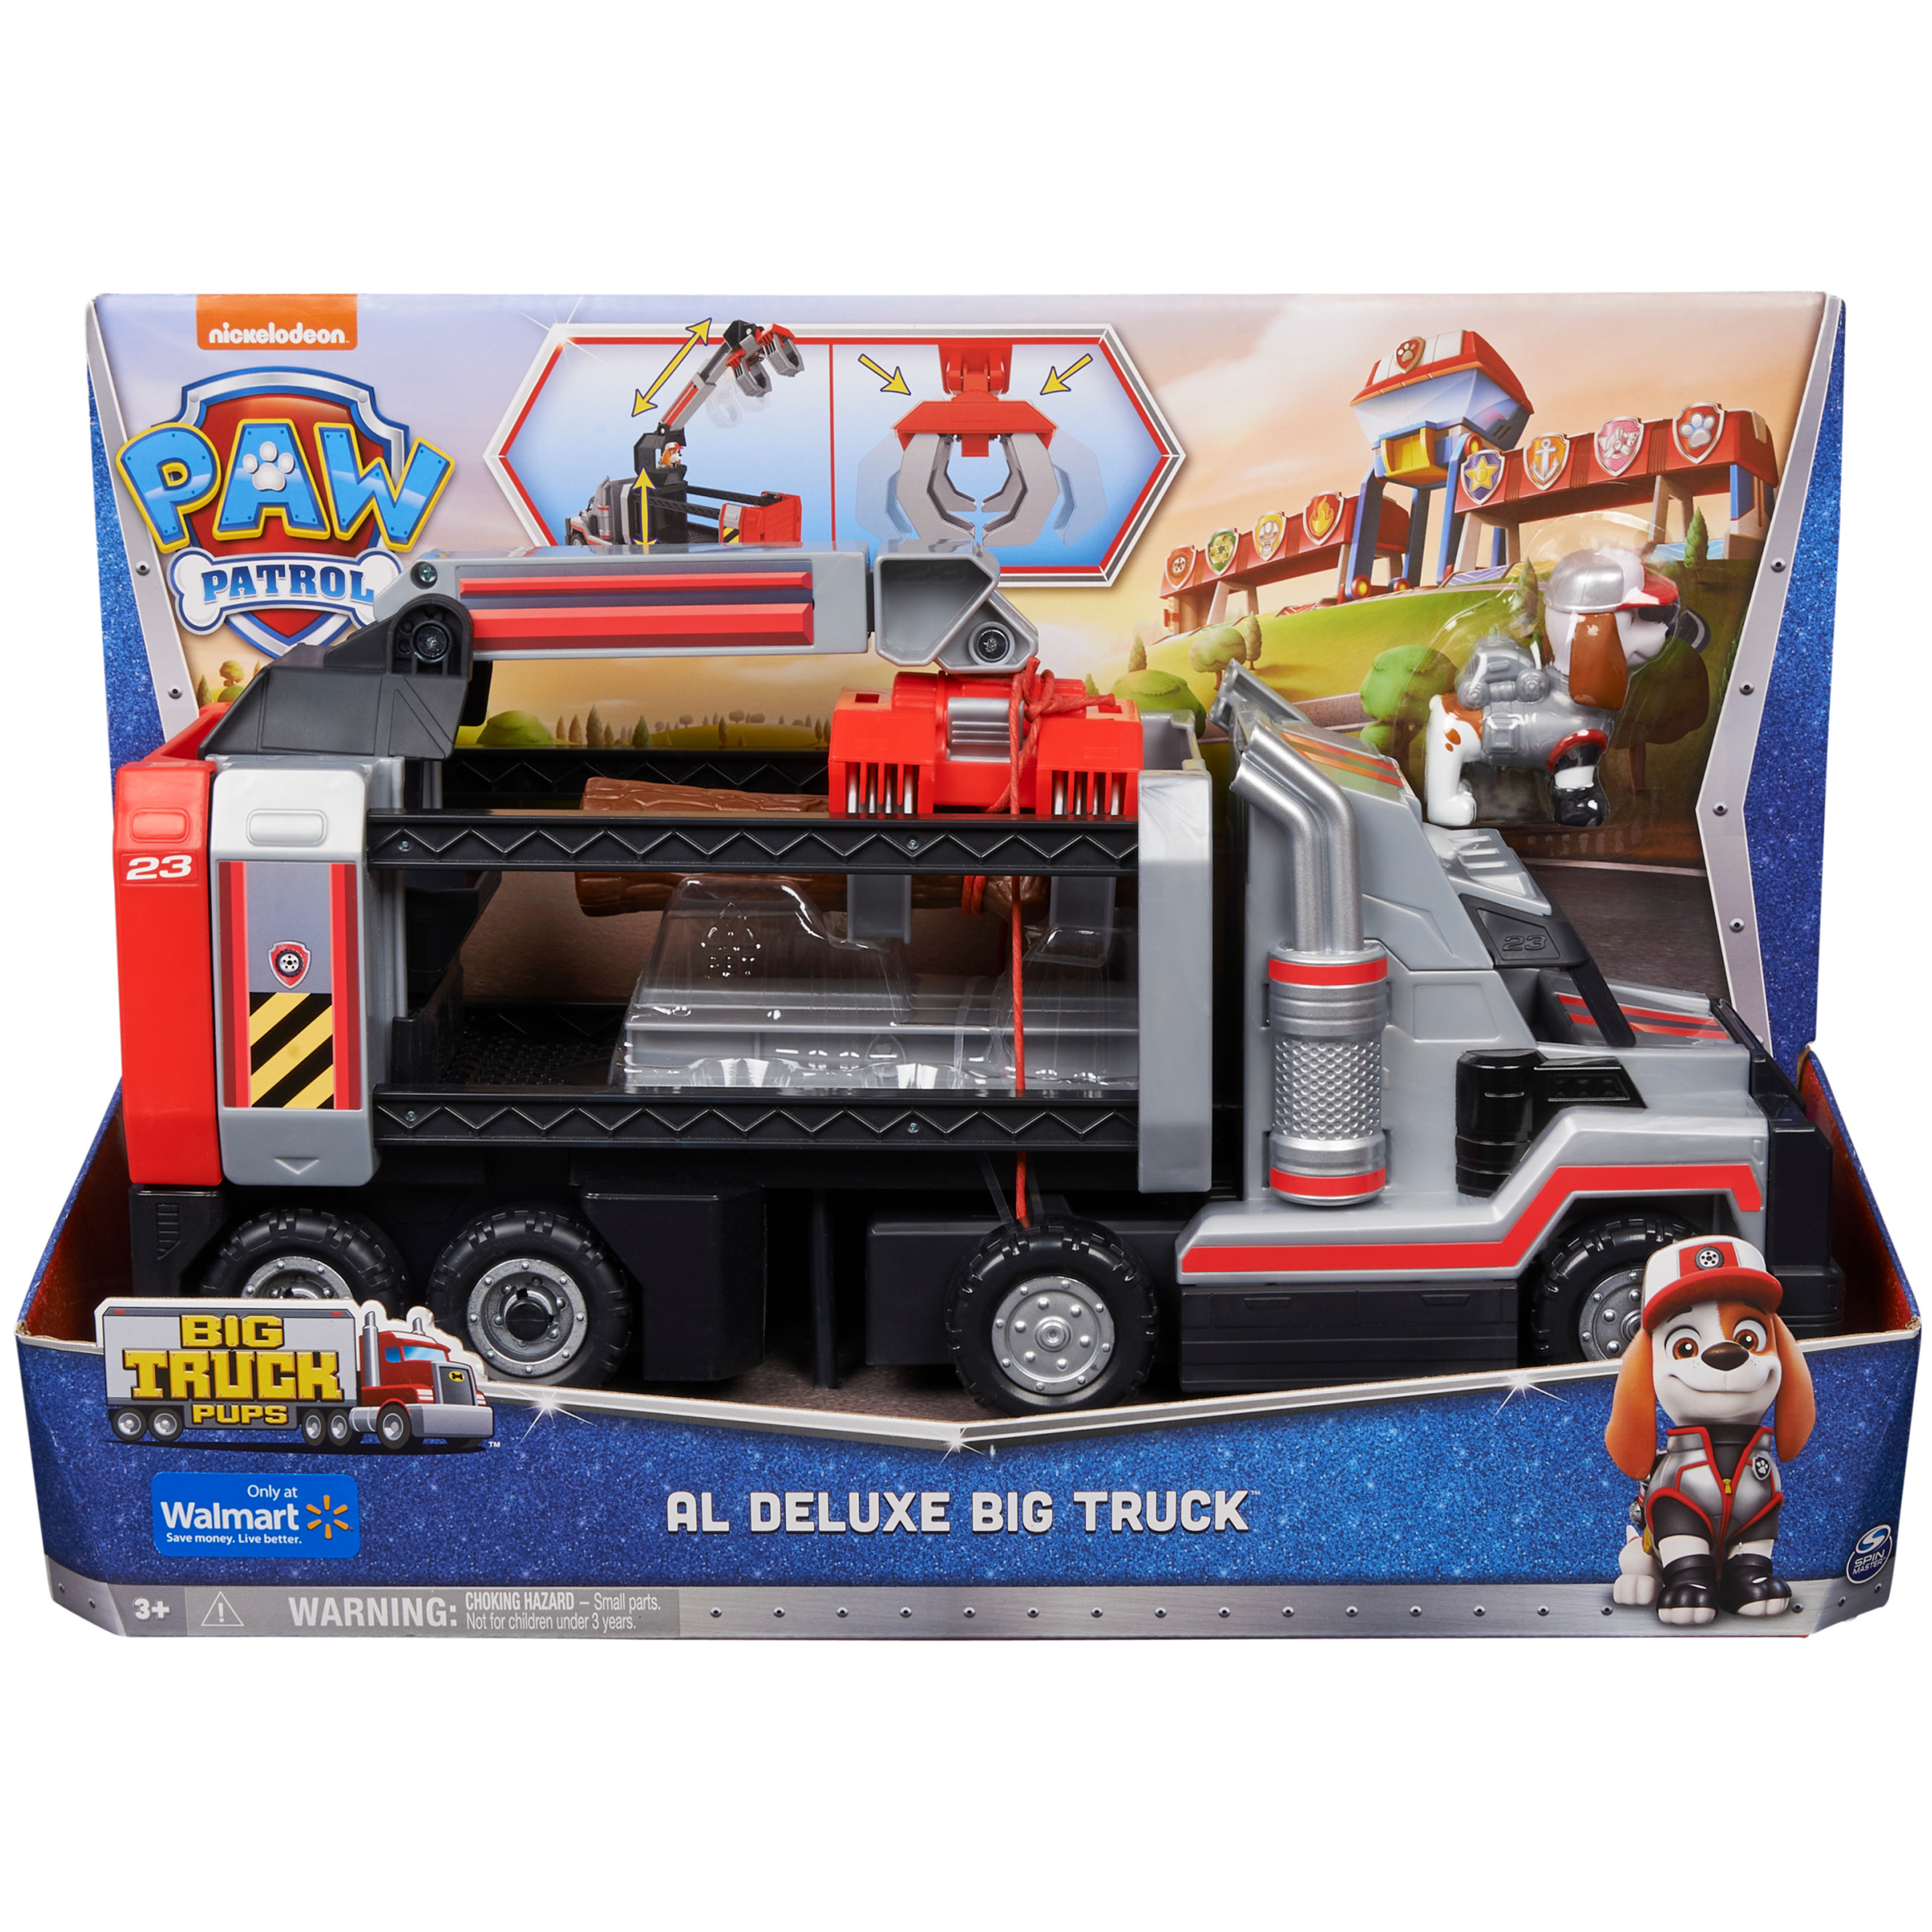 PAW Patrol, Al’s Deluxe Big Truck Toy with Moveable Claw Arm and Accessories - image 2 of 8